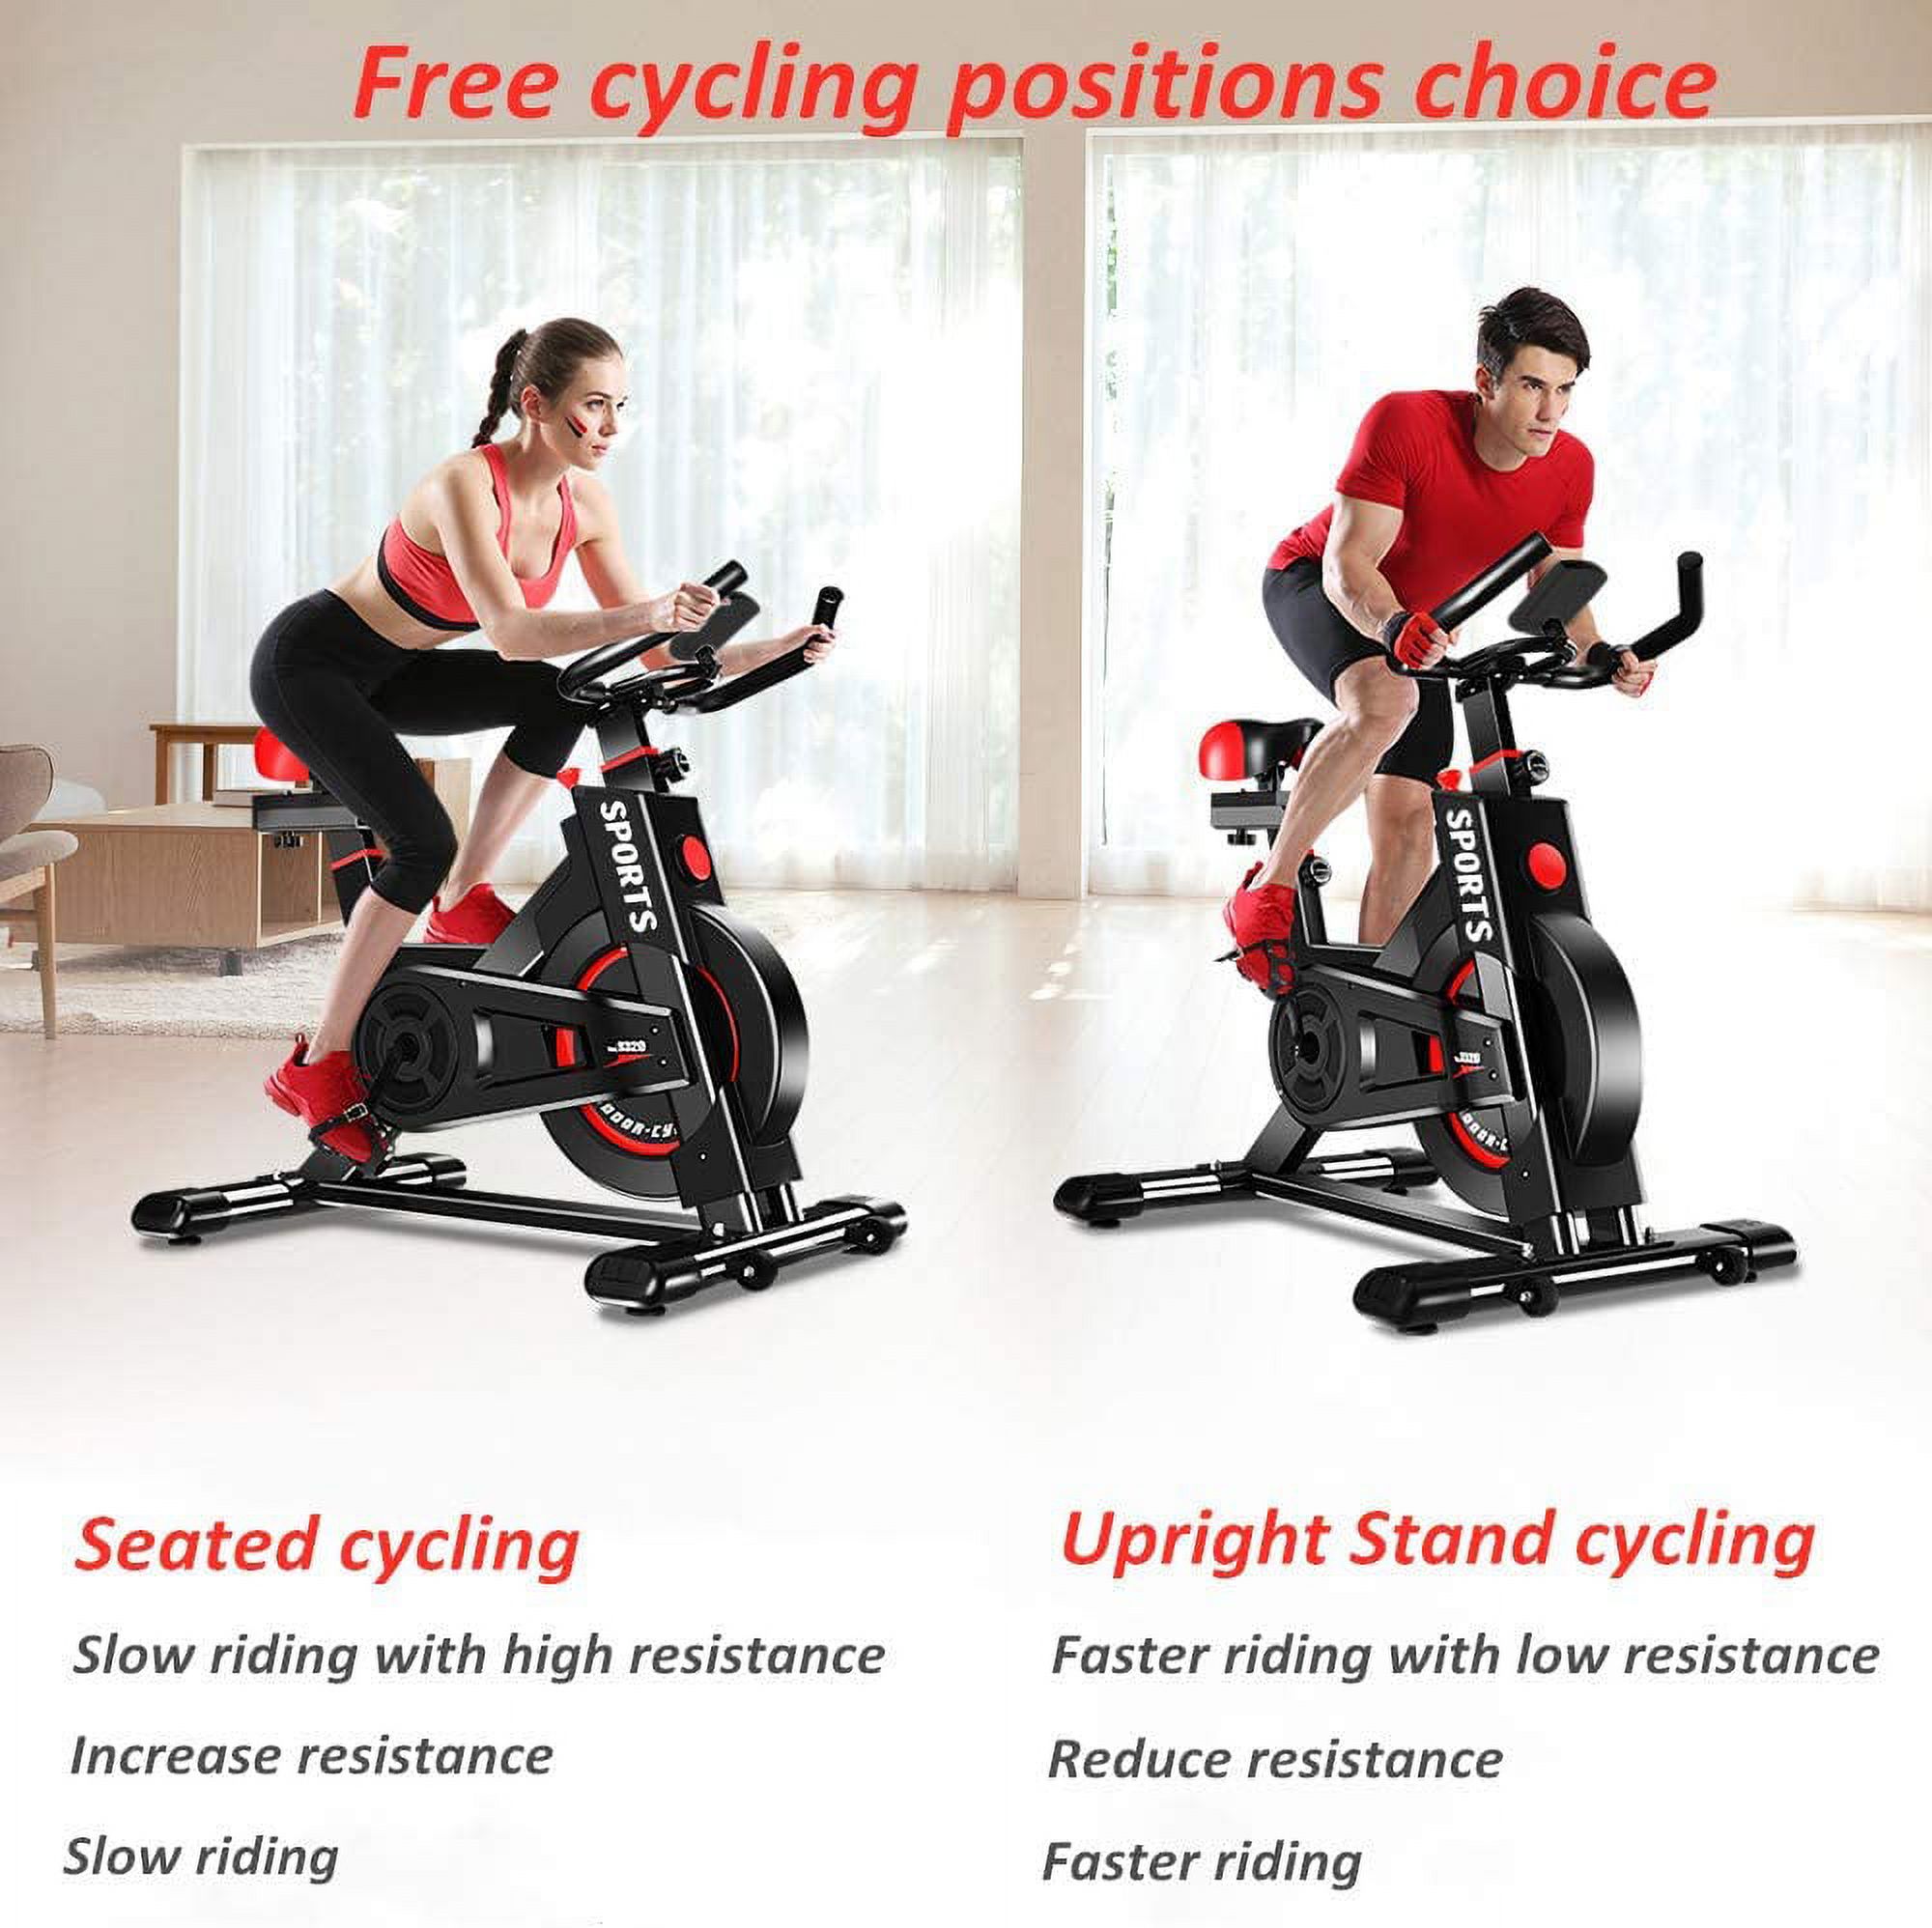 YOLEO Stationary Exercise Bike Indoor Cycling Bike Fitness Stationary All-inclusive Flywheel Bicycle with Resistance for Gym Home Cardio Workout Machine Training 2021 Version (Black-Standard) - image 5 of 8